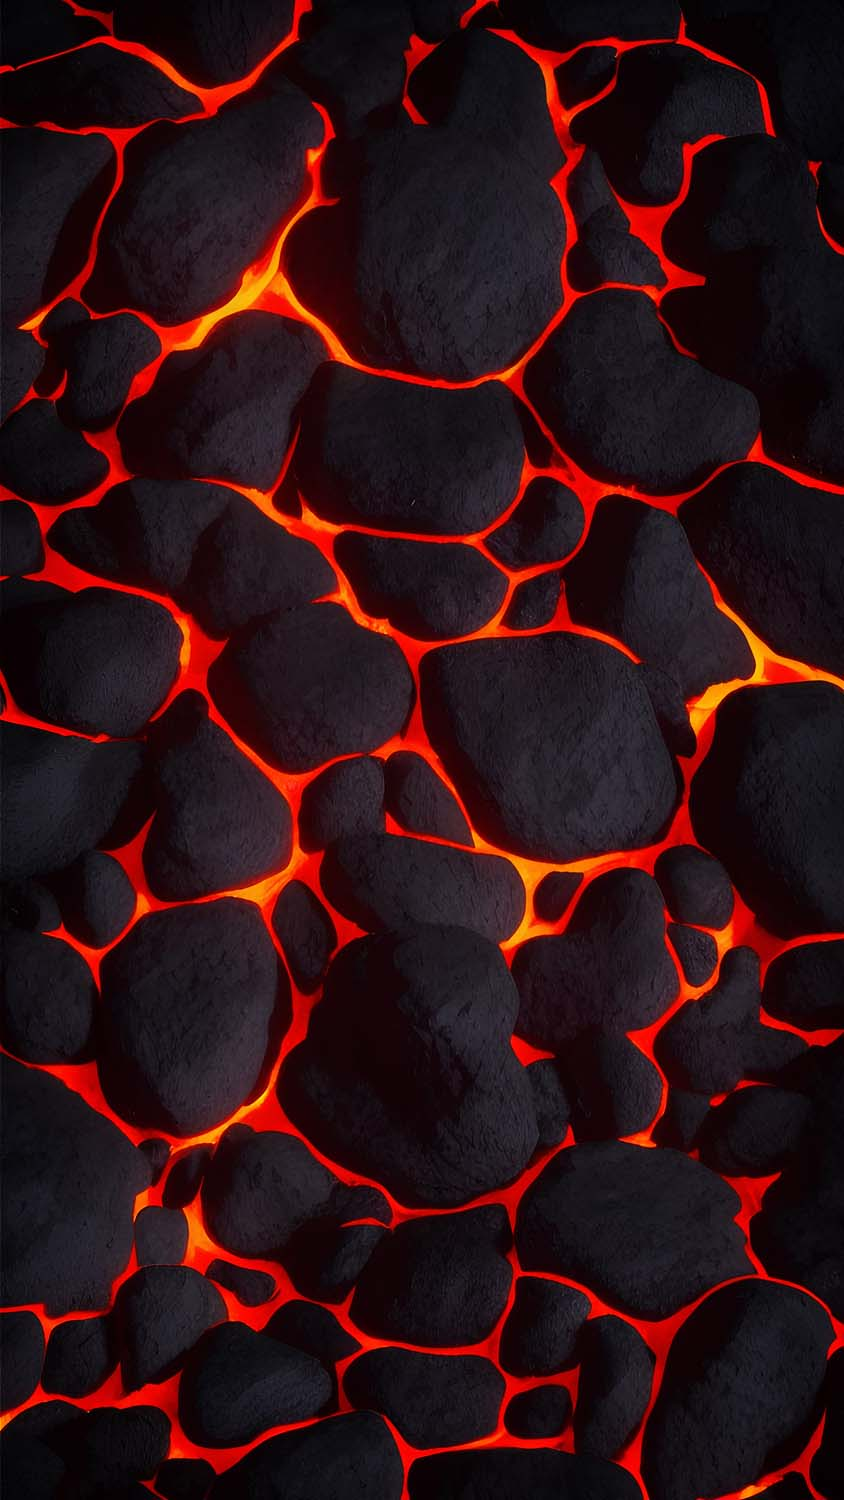 Red Lava Stones IPhone Wallpaper 4K  IPhone Wallpapers